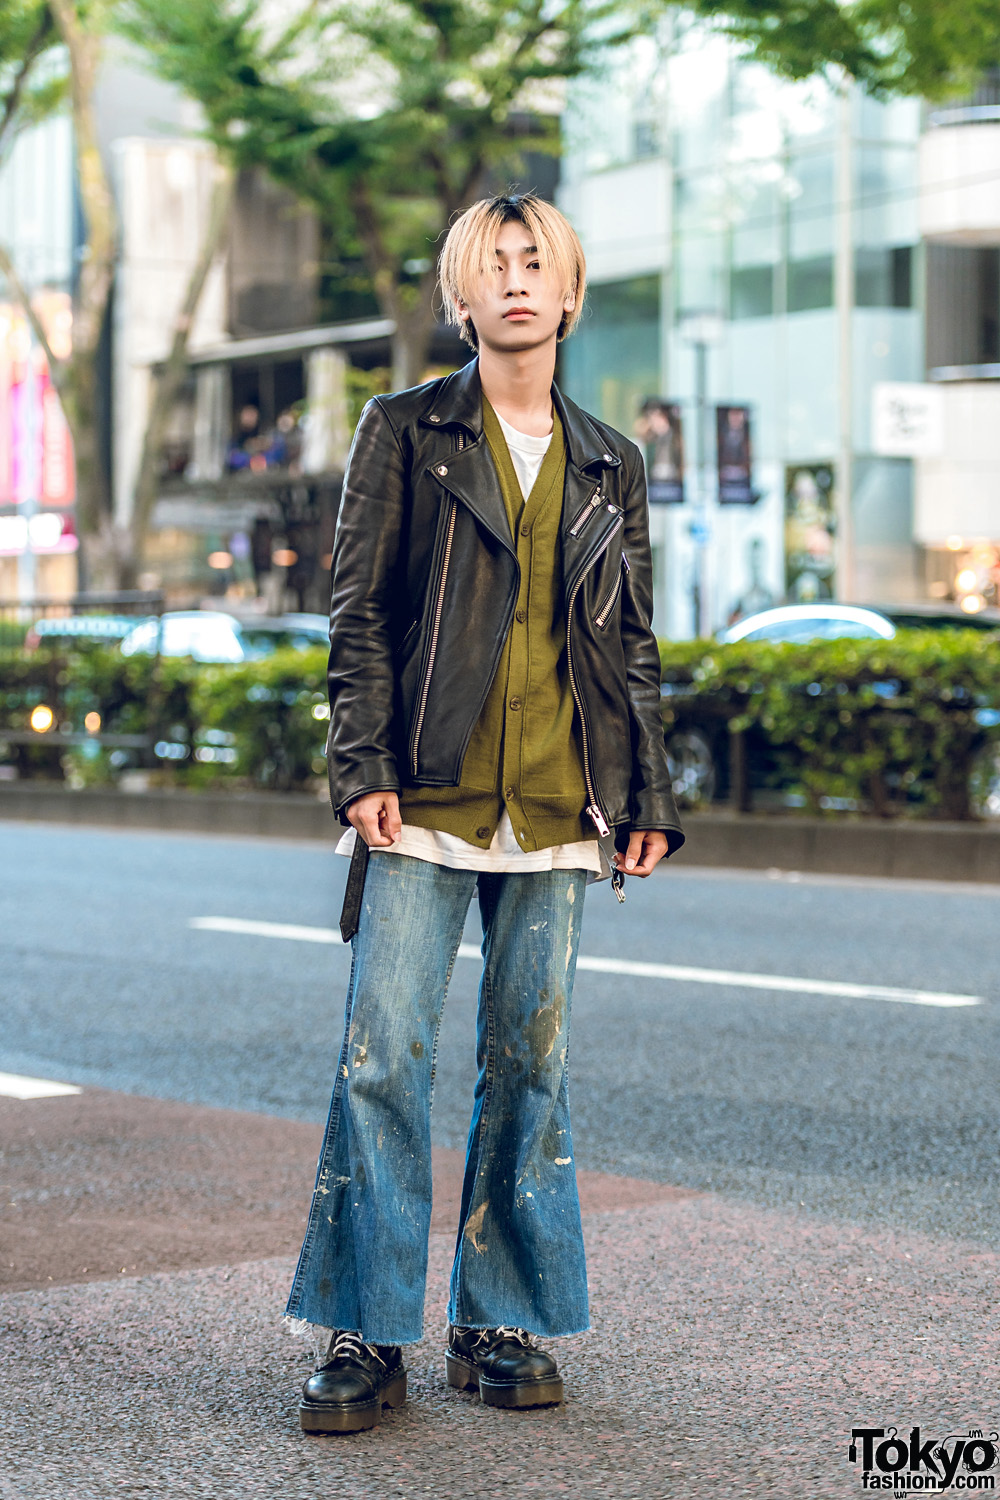 Cyber Dyne Leather Jacket, Allege Top, Levi’s Flared Jeans & Dr. Martens Shoes in Harajuku